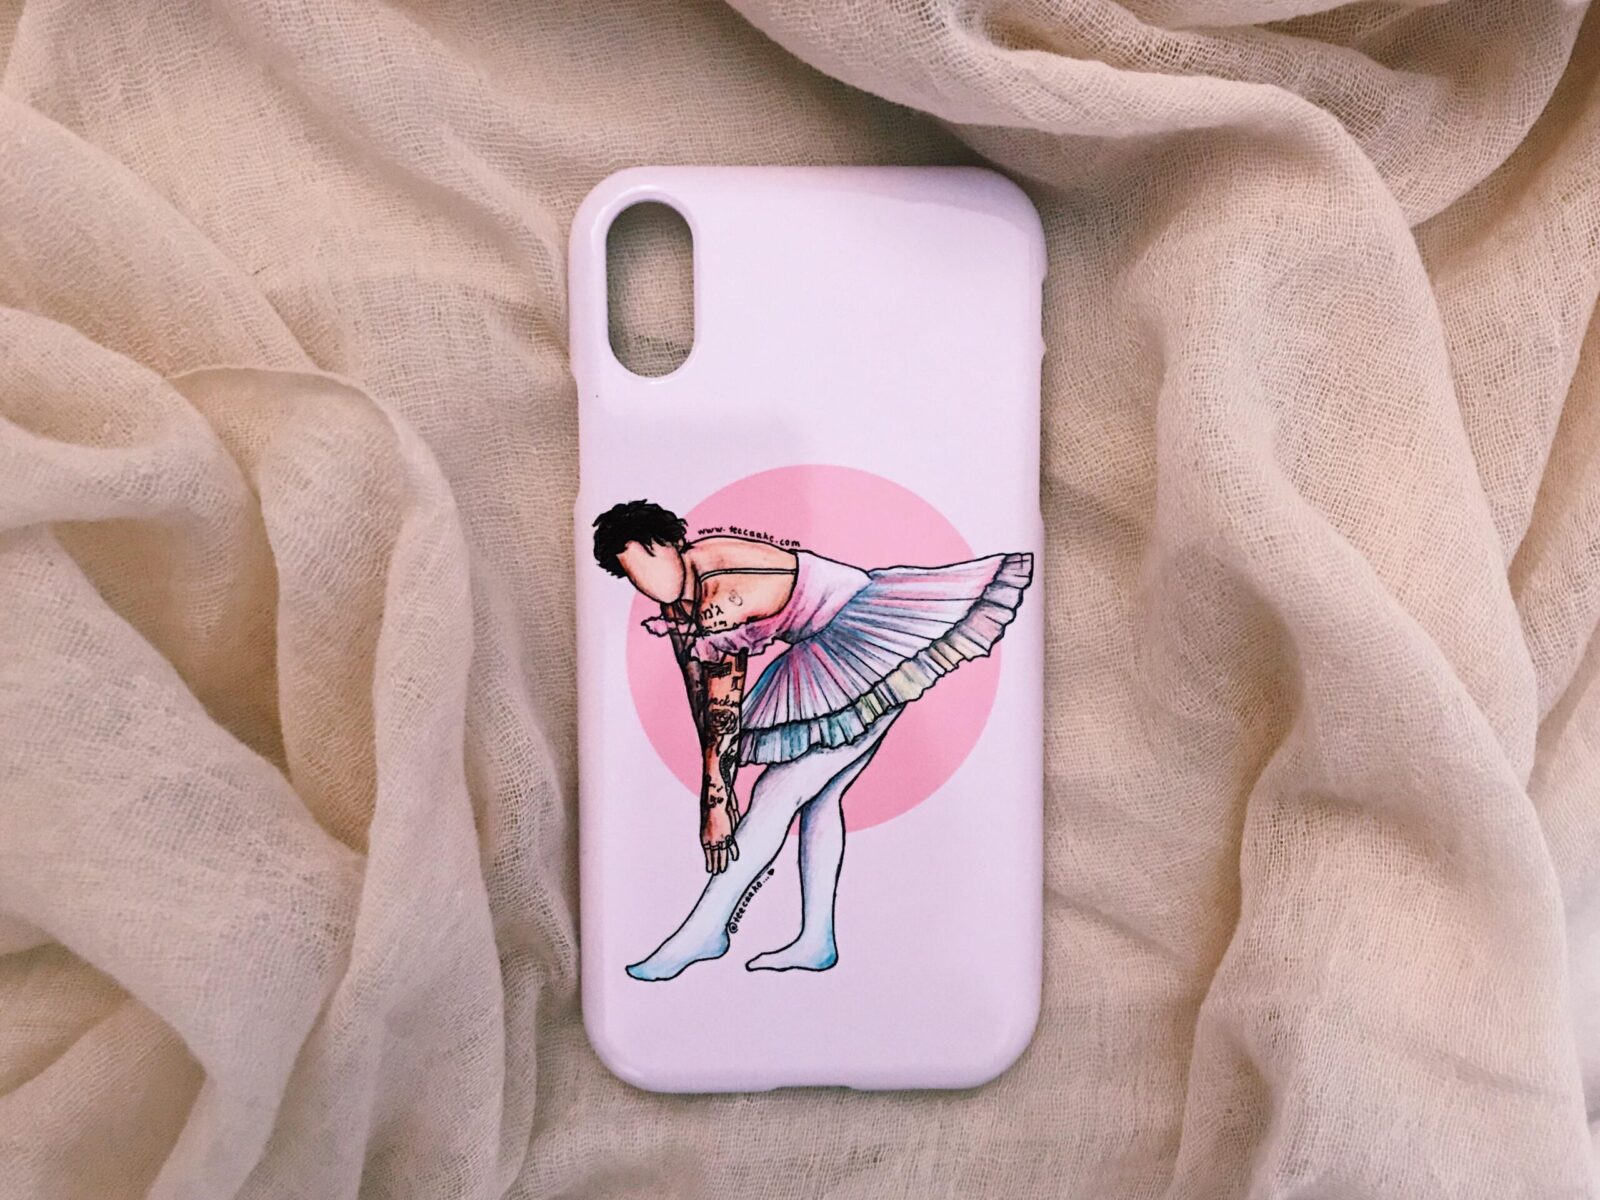 Samsung S10+ Aesthetic Dancer Phone Case Ballet Art Cover fit for iPhone 13,12,11 Pro Xs 8,X Z173 A12 A70 Huawei P30,P20 S20 A51